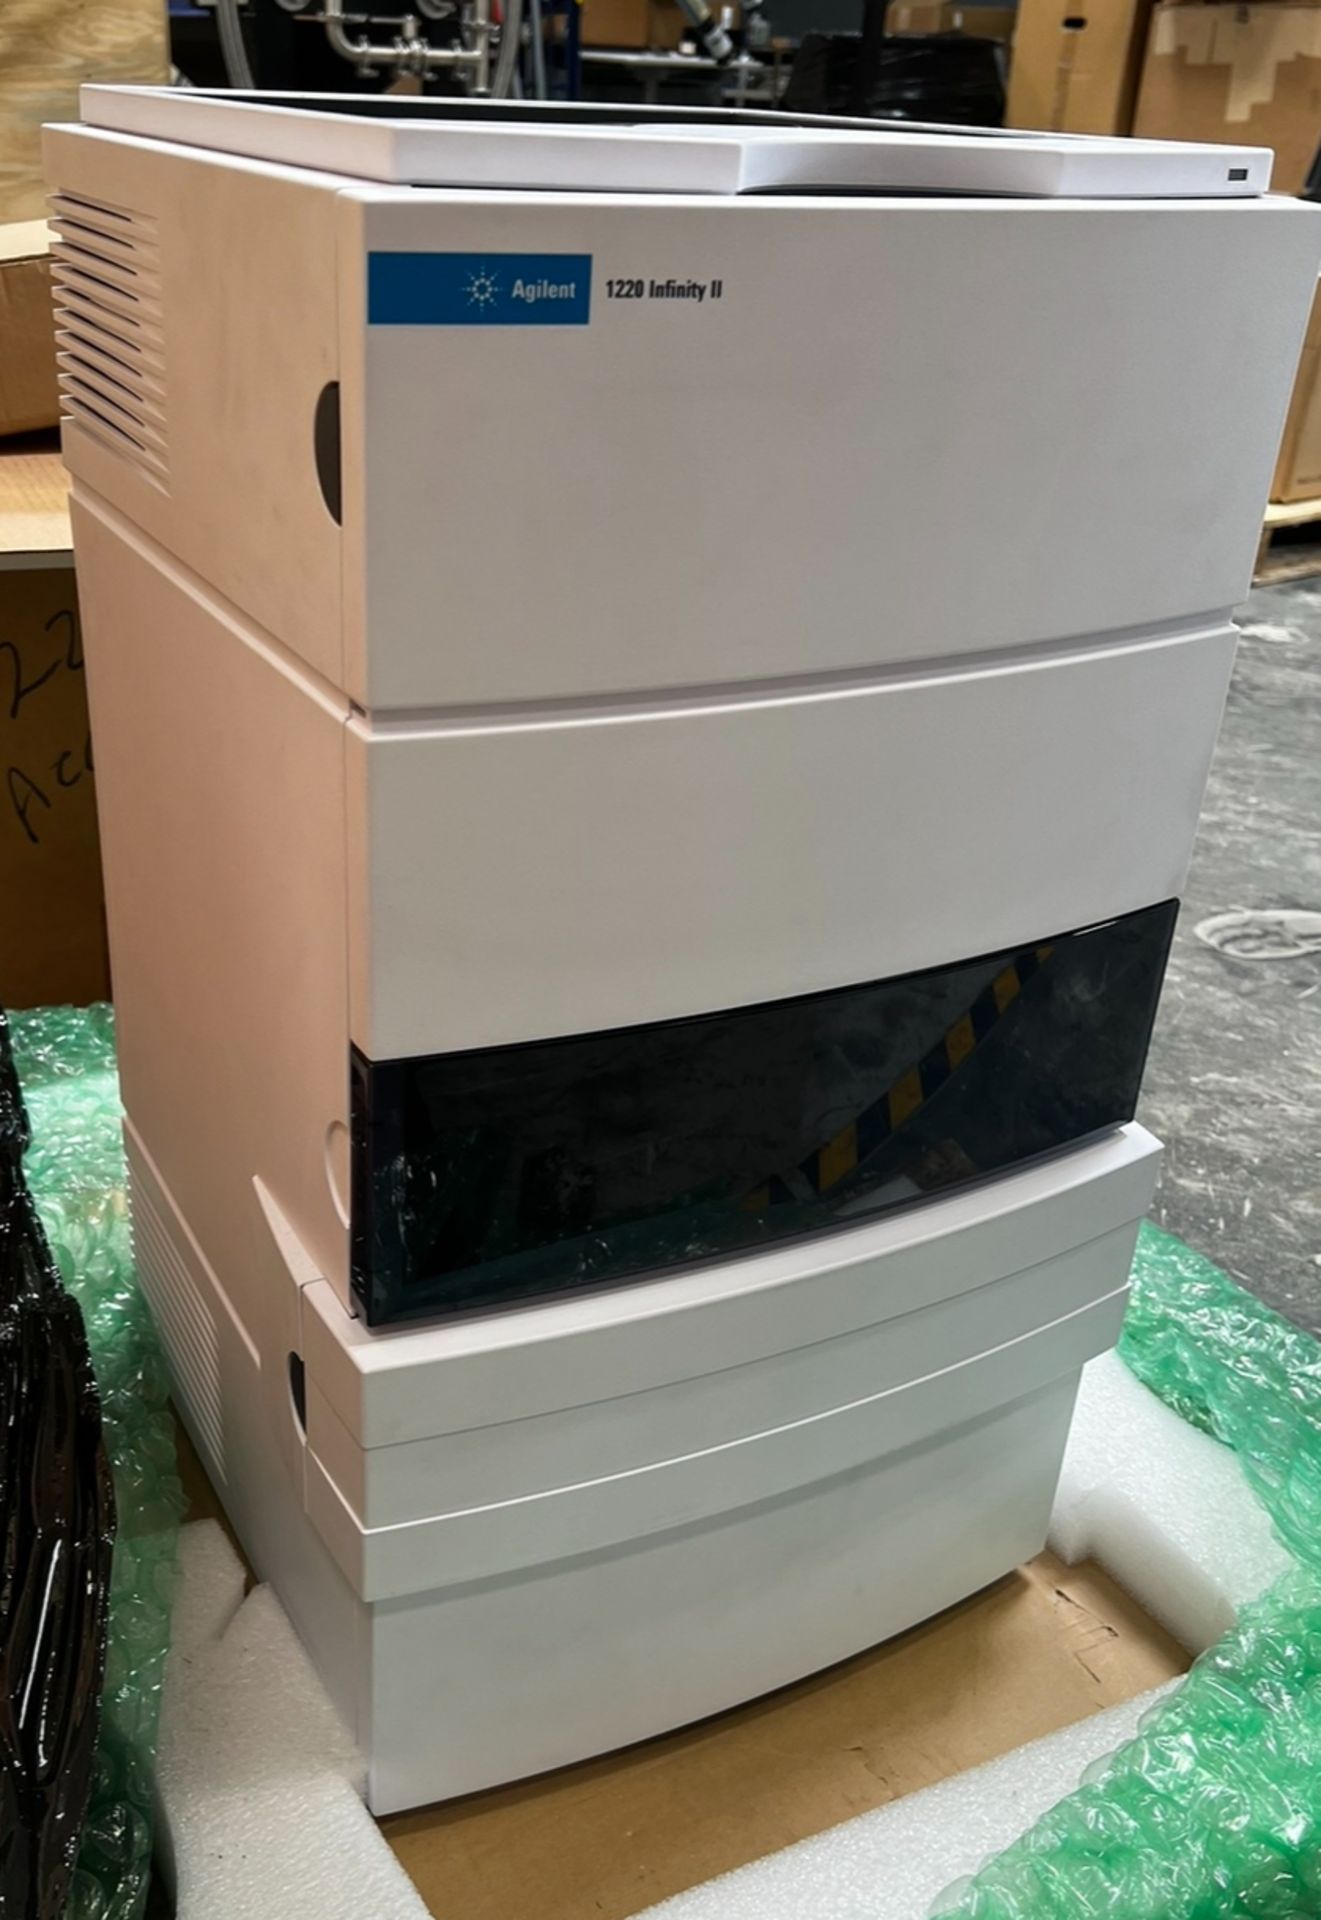 New/Unused- Agilent Analytical HPLC System, Model 1220 Infinity II LC System. - Image 16 of 18